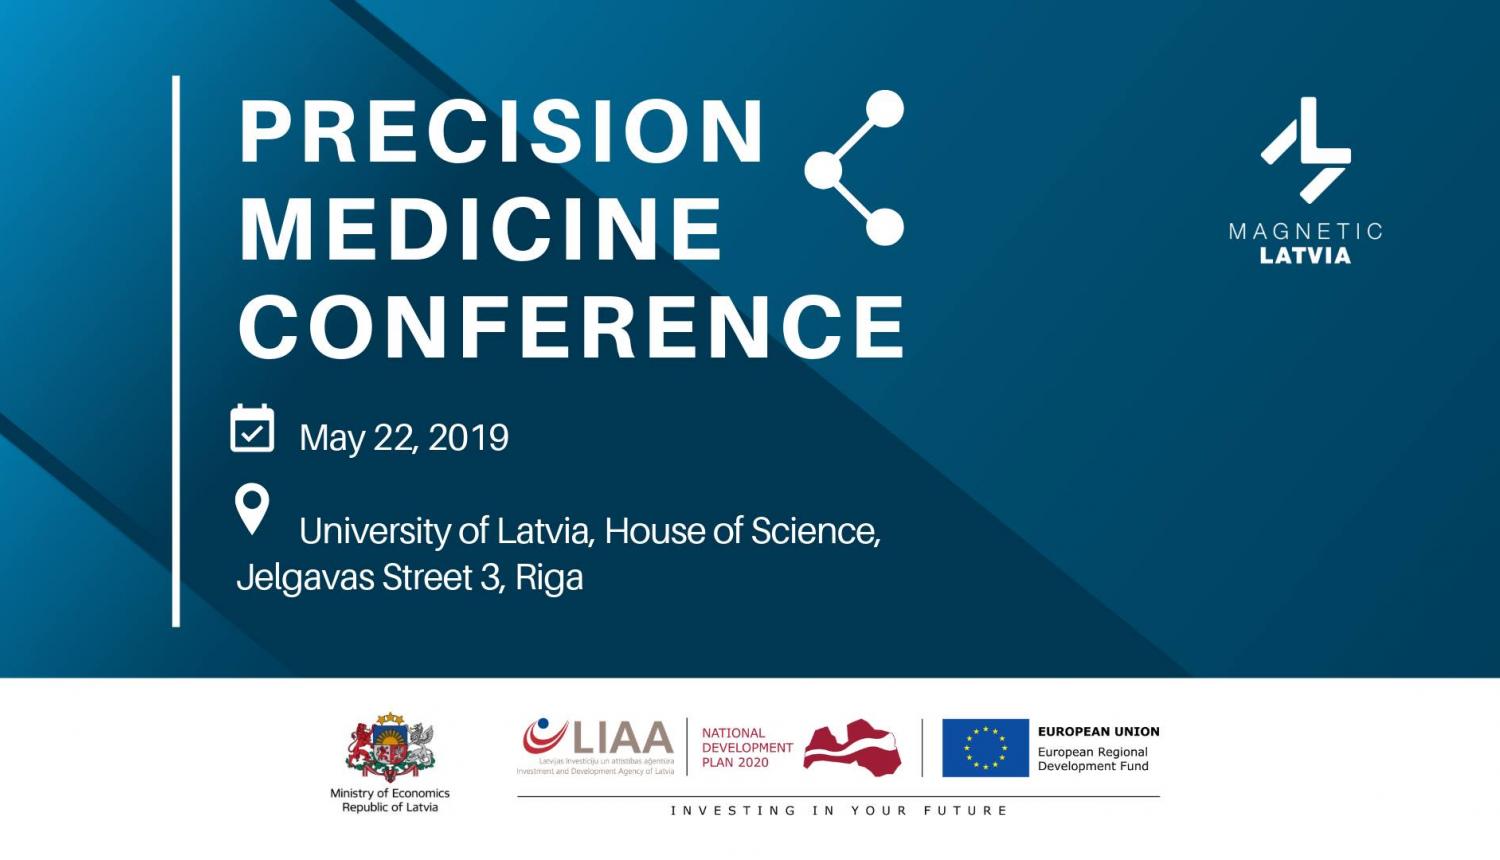 The Precision Medicine Conference will take place in Riga on May 22